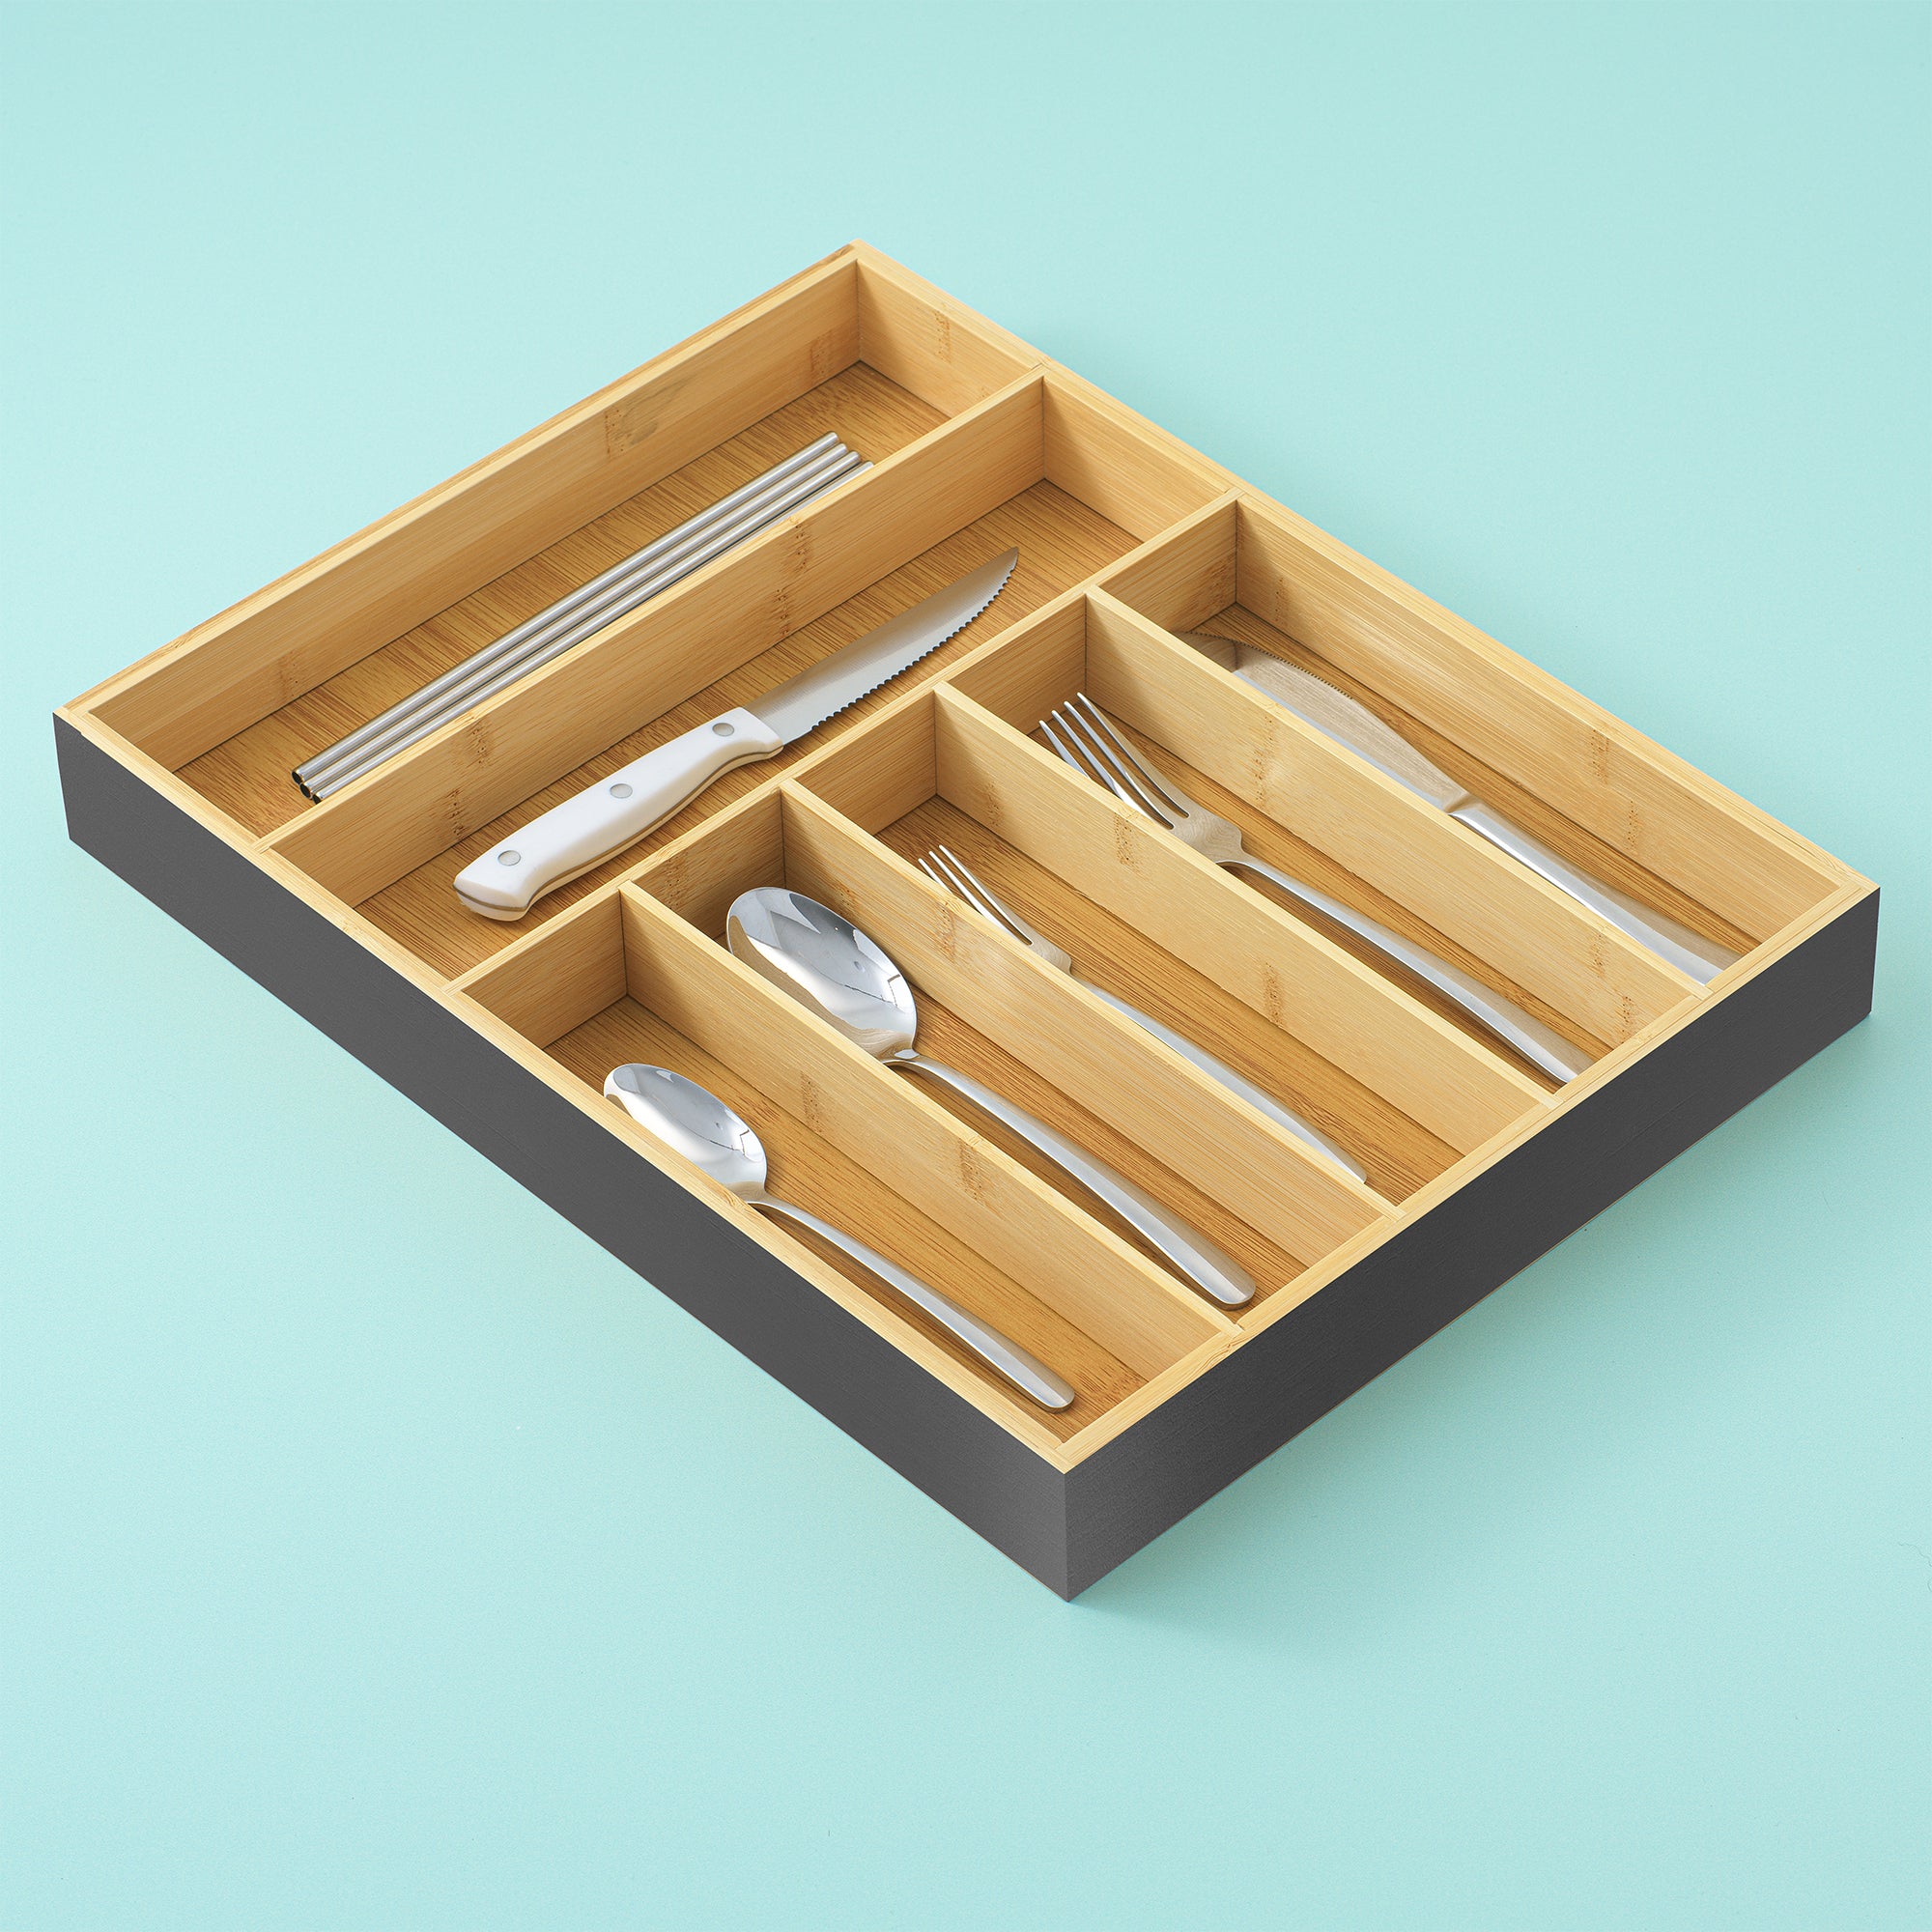 7 Compartment Bamboo Drawer Organizer